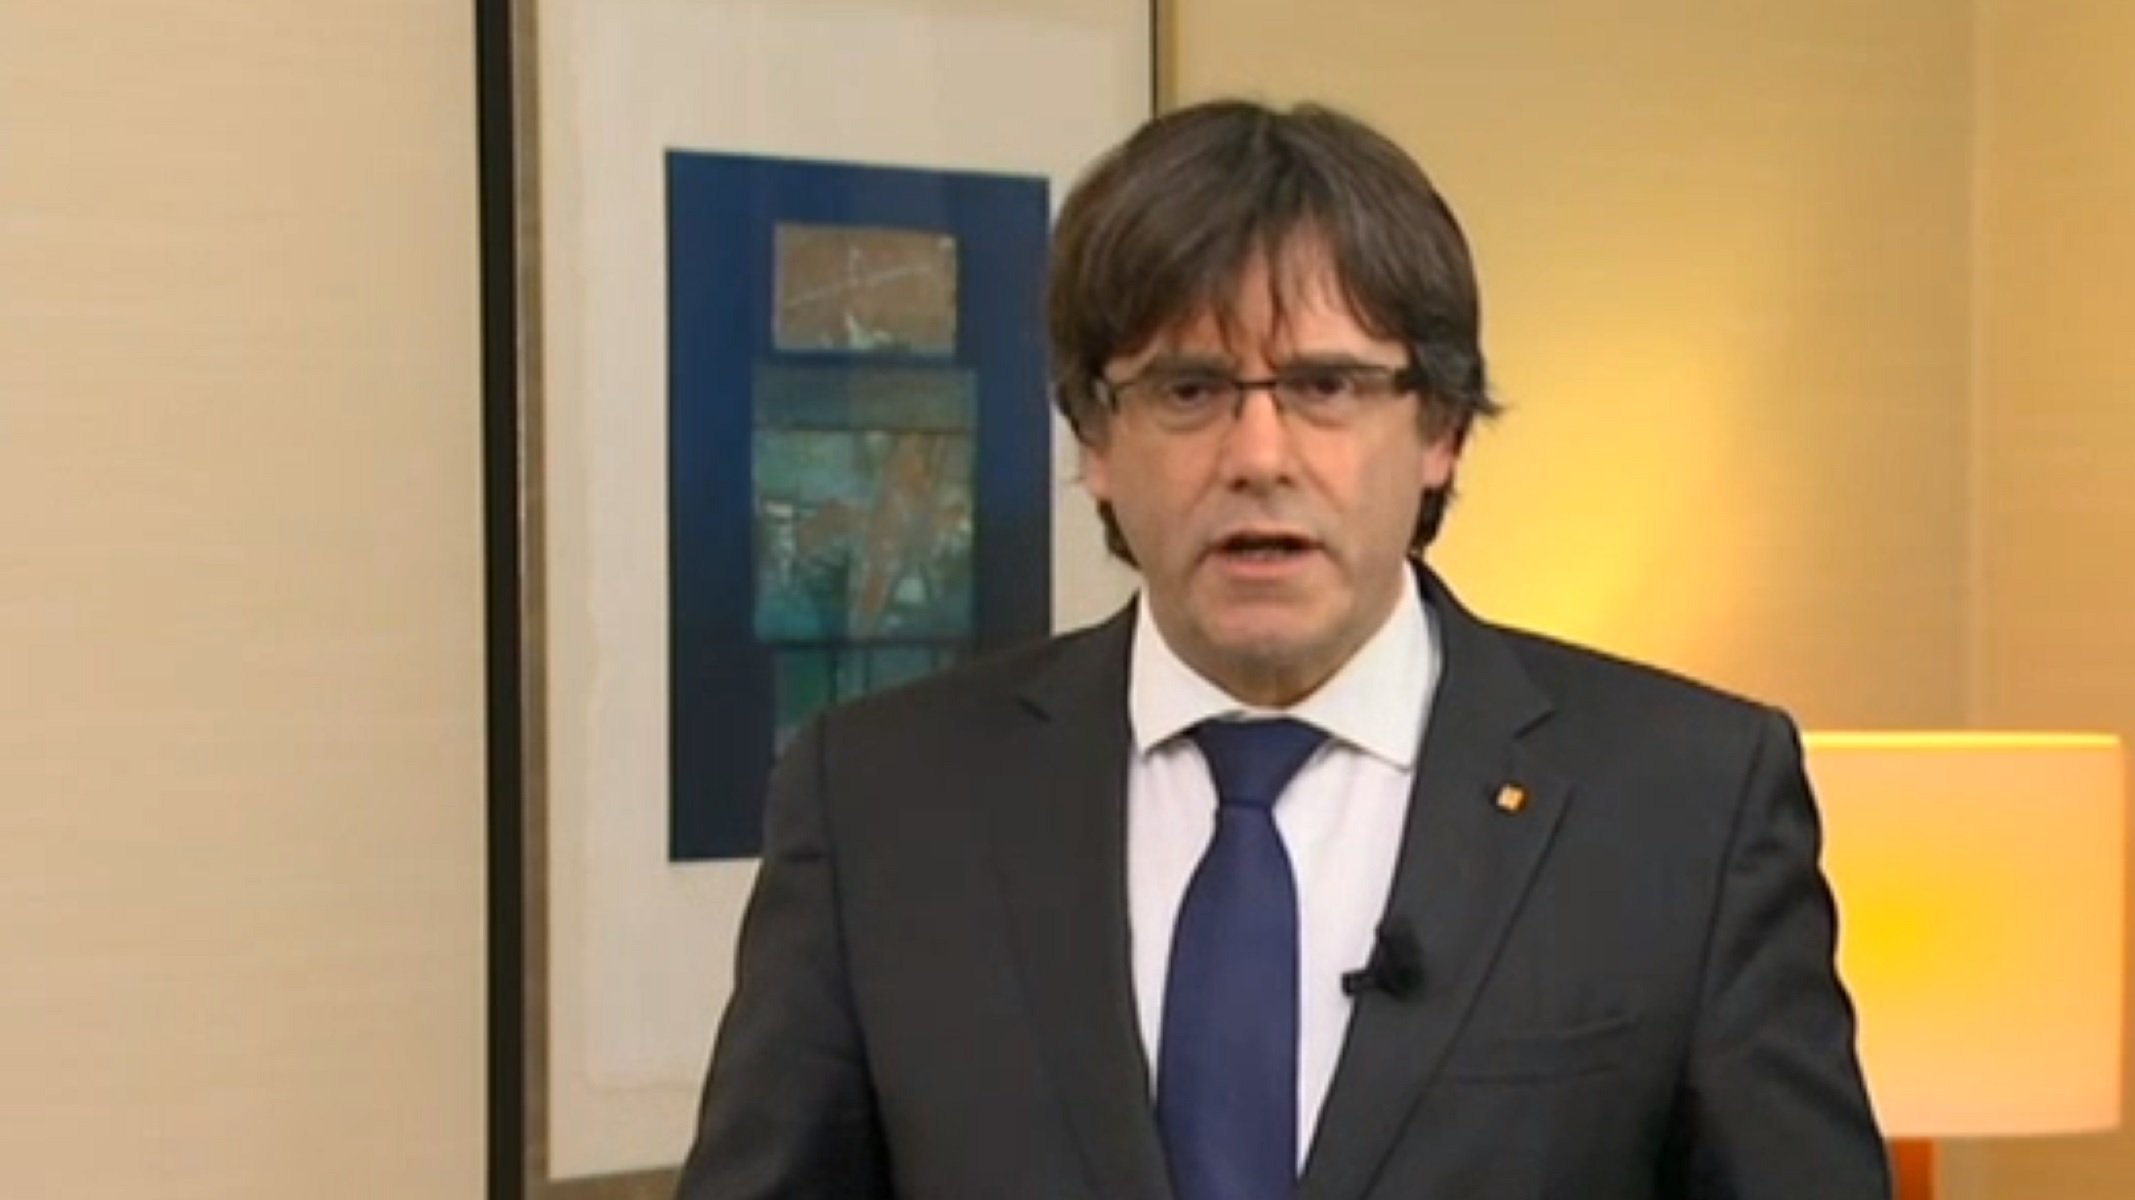 Puigdemont calls for violence-free fight back against repression he expects to be "long and fierce"